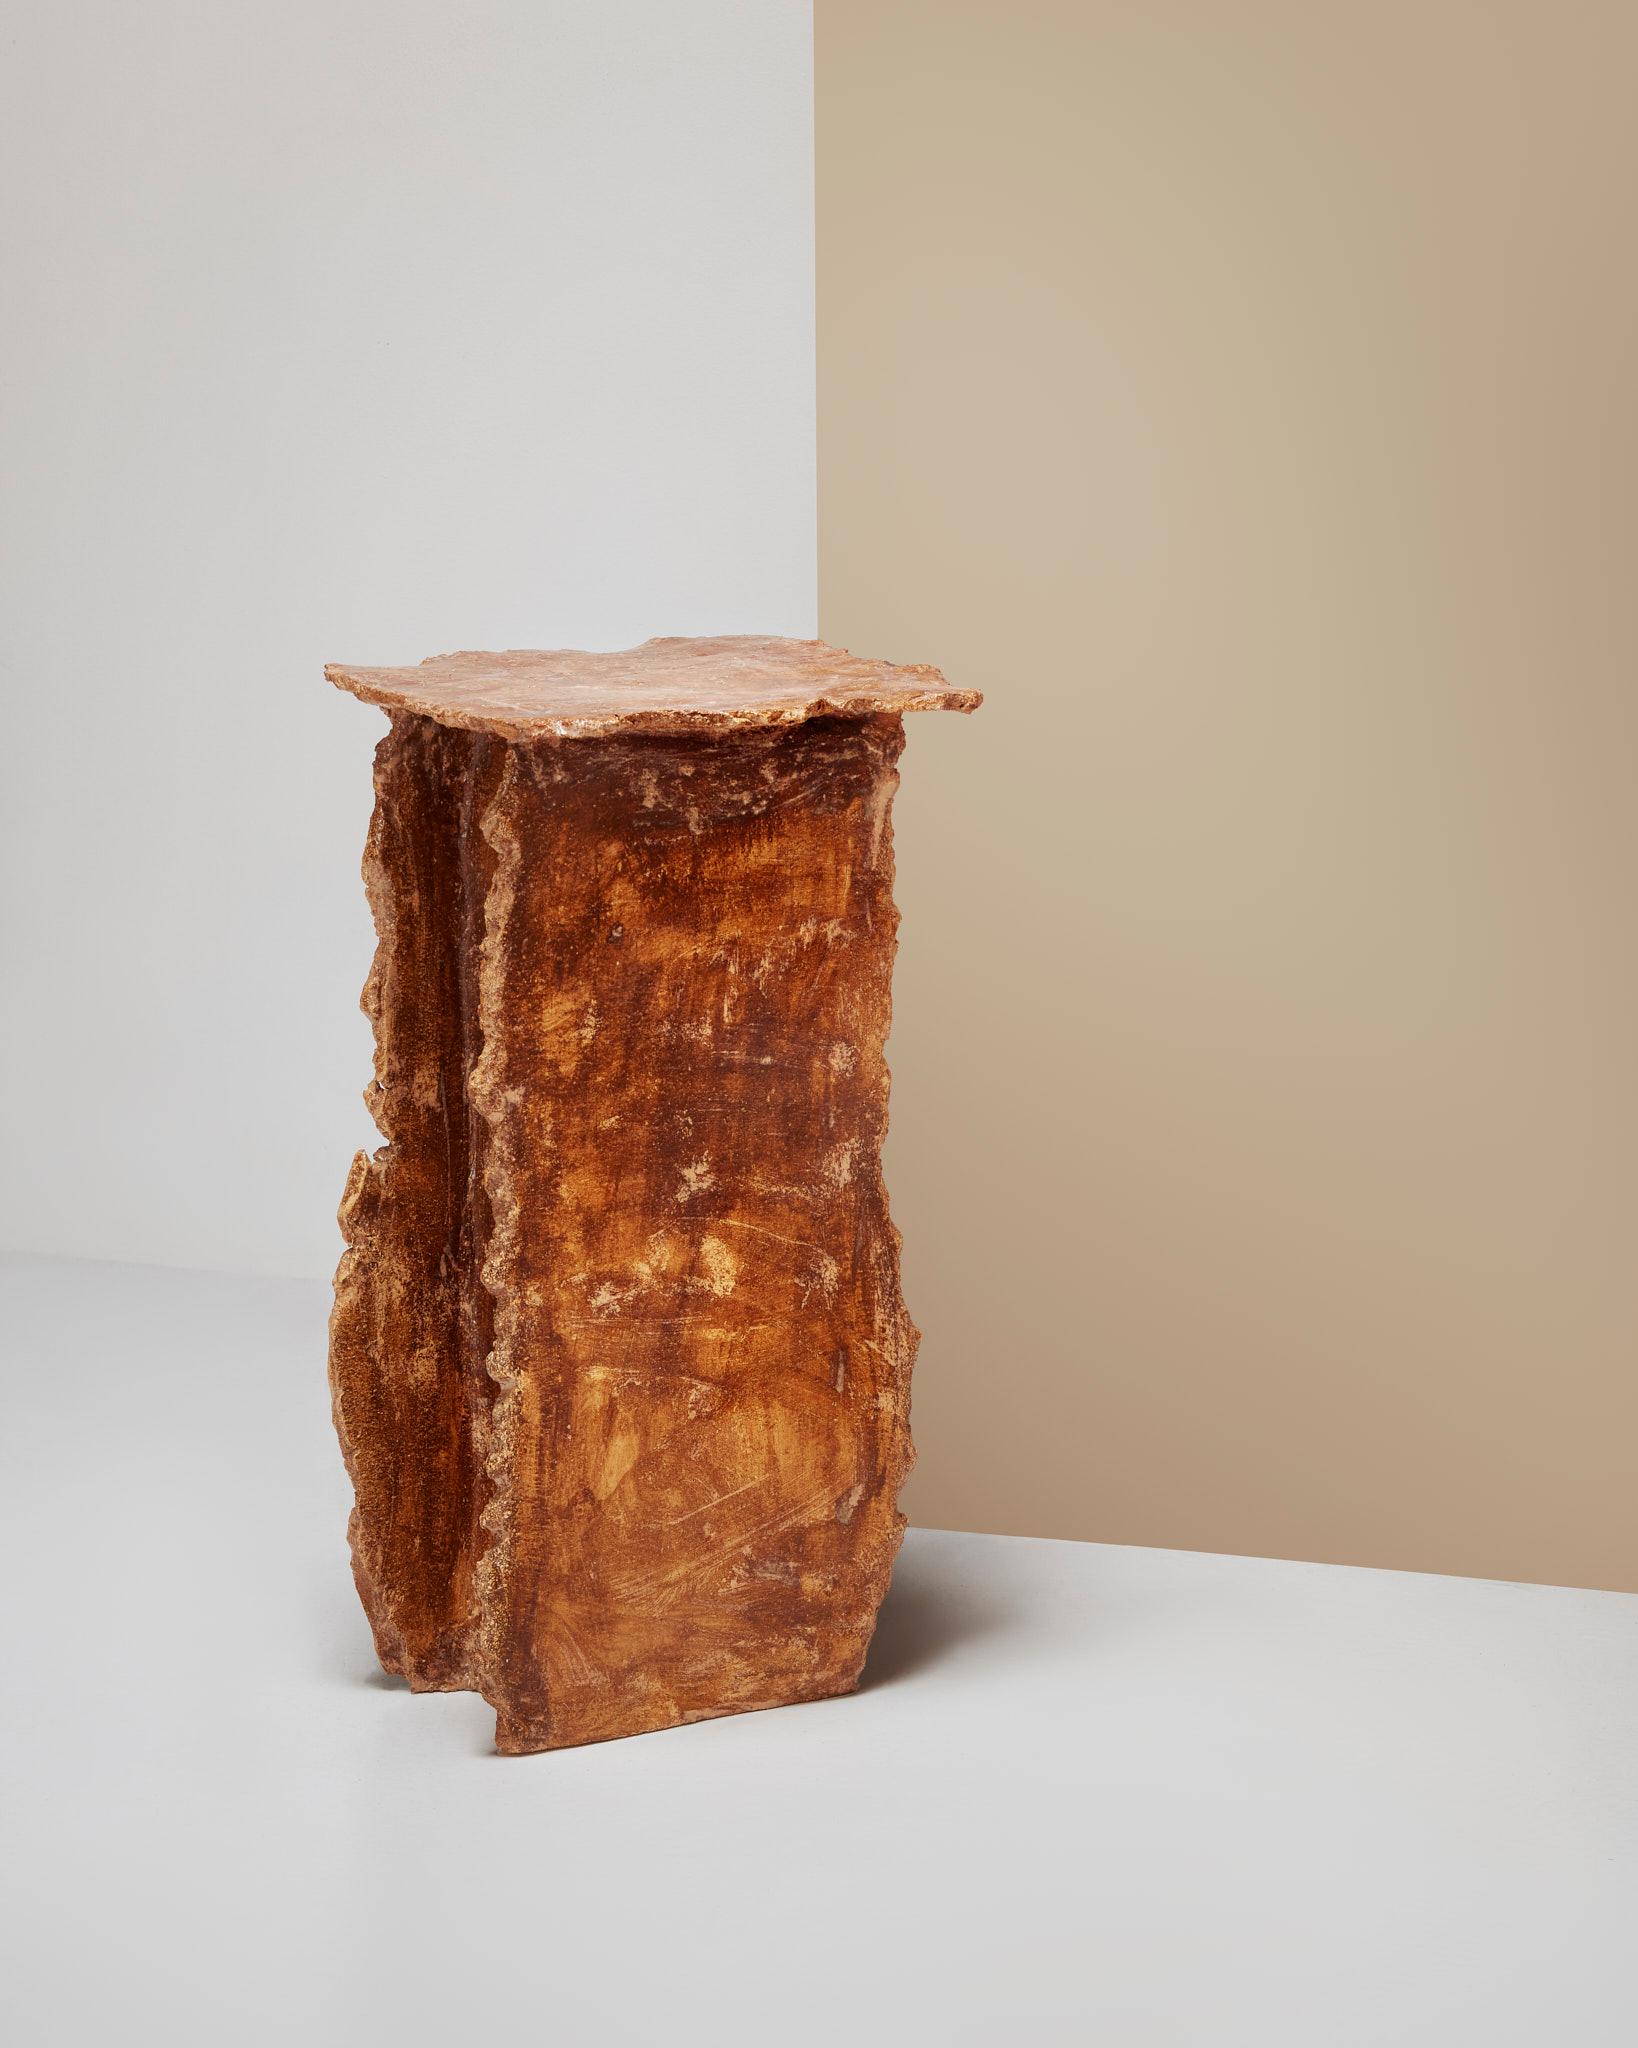 High Ripped Table by Willem Van Hooff
Handmade
Dimensions: W 35 x H 63 cm (Dimensions may vary as pieces are hand-made and might present slight variations in sizes)
Materials: Earthenware.
Finish: Glazed.


Willem van Hooff is a designer based in